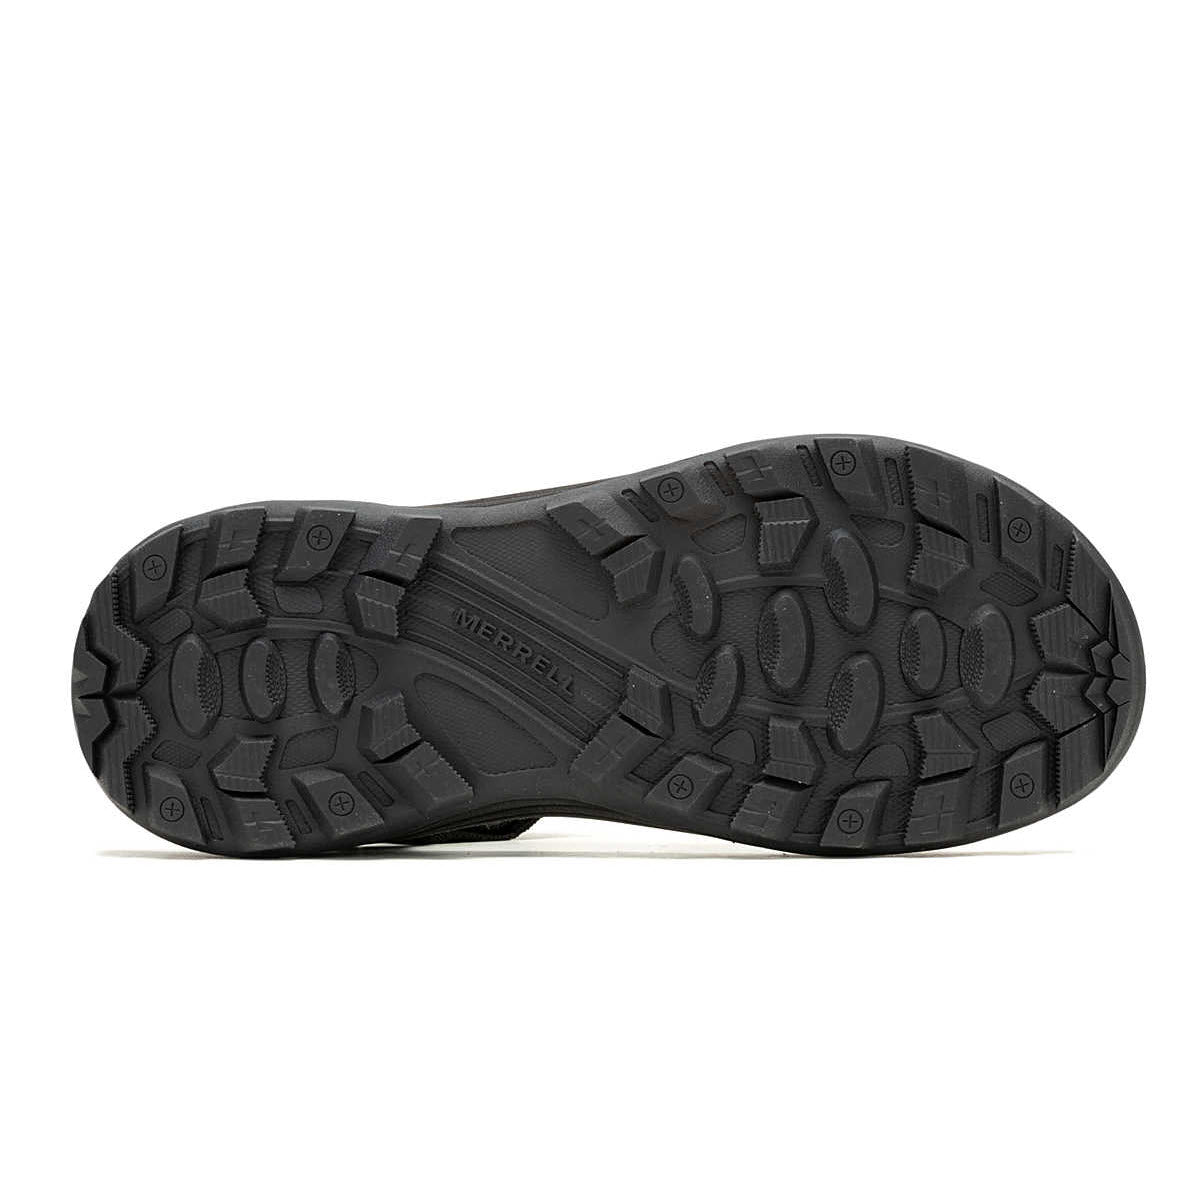 Sole of a black Merrell Speed Fusion Web Sport sandal showing detailed tread pattern for grip and traction.